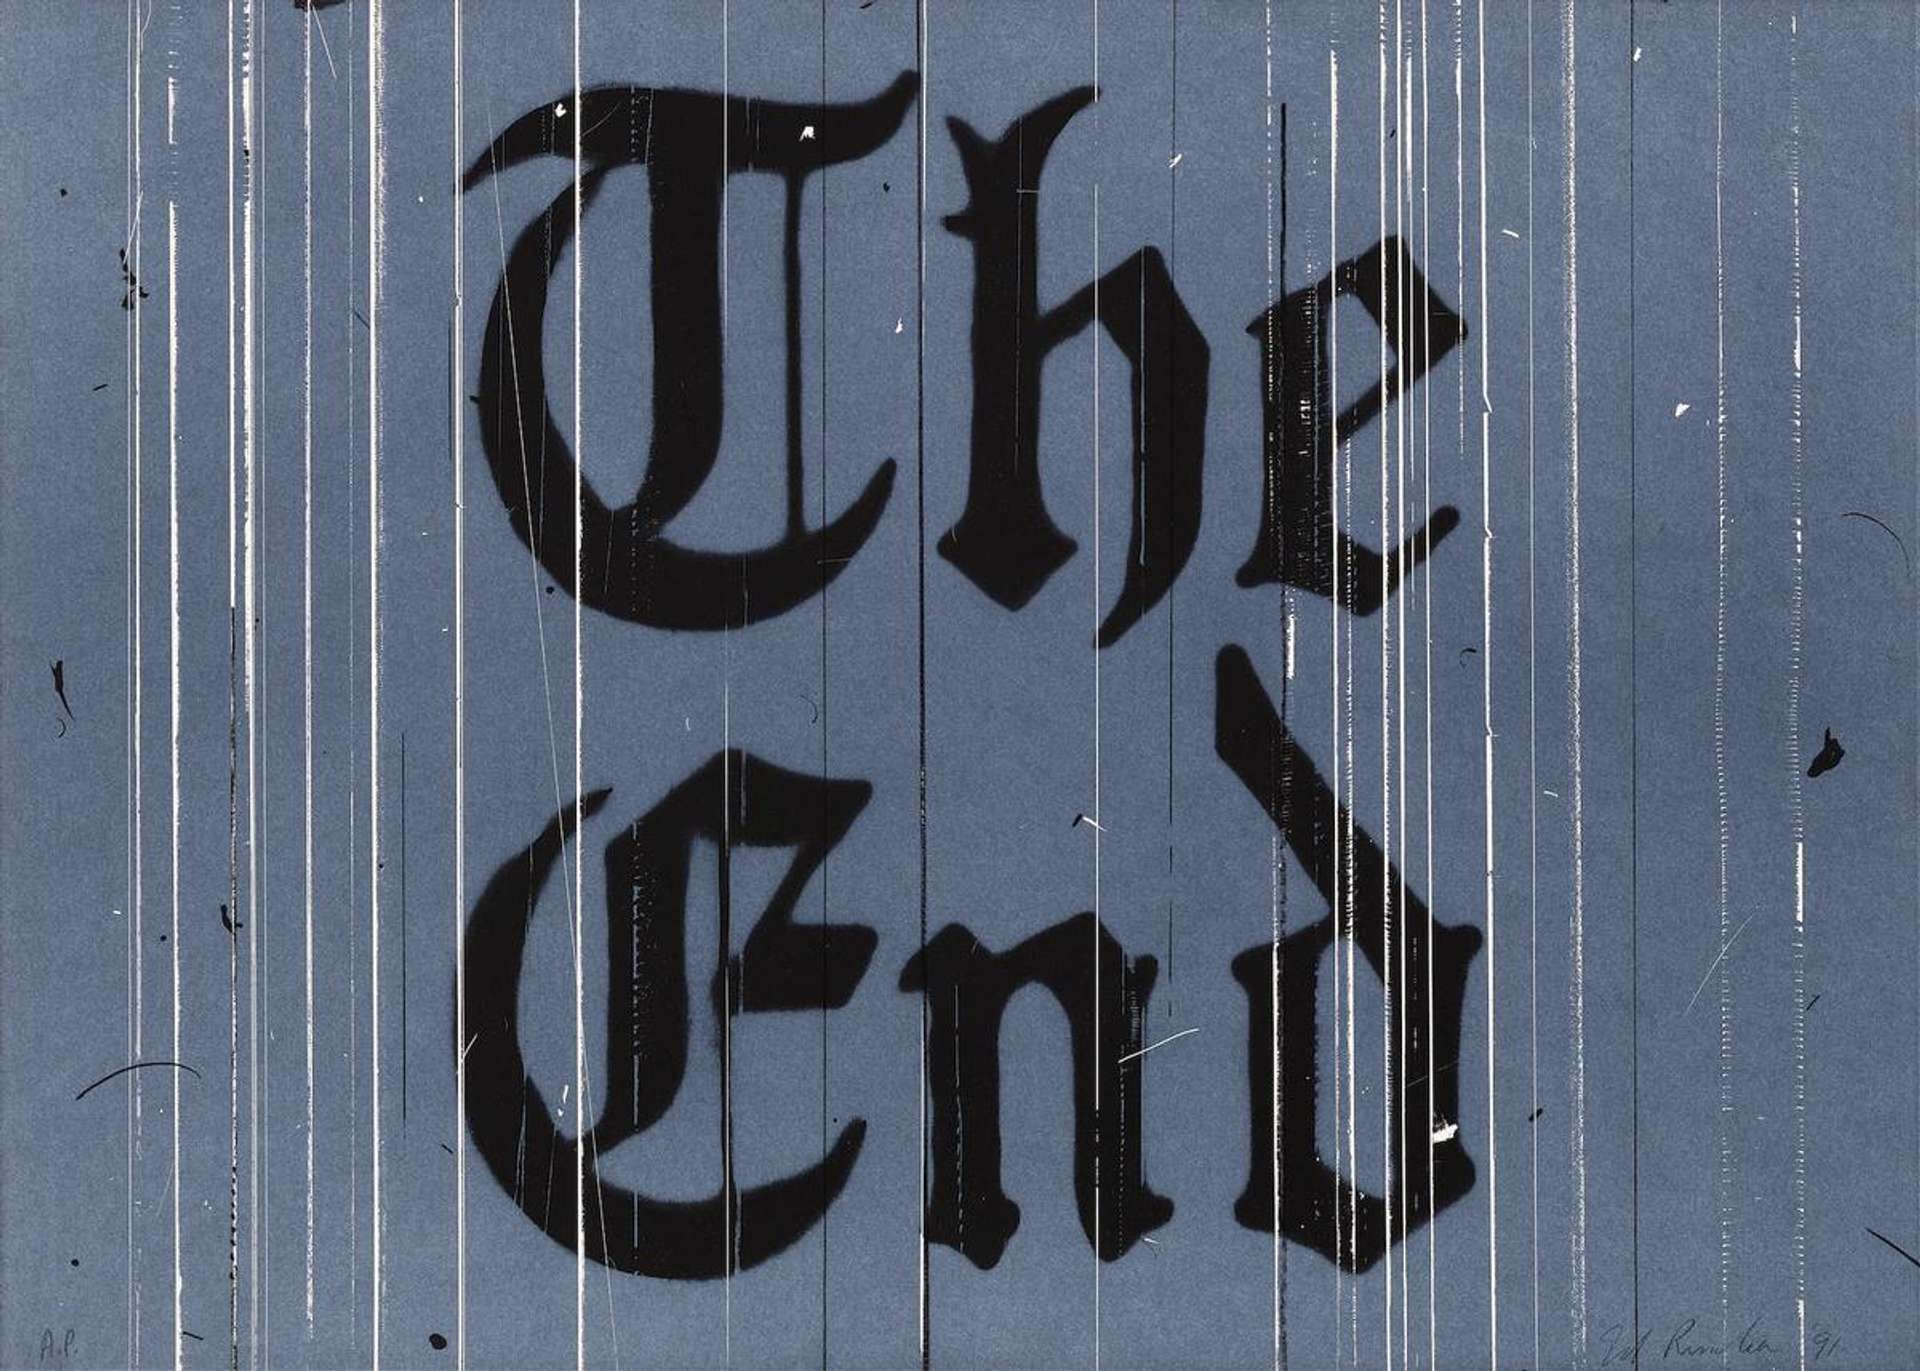 Ed Ruscha: The End - Signed Print